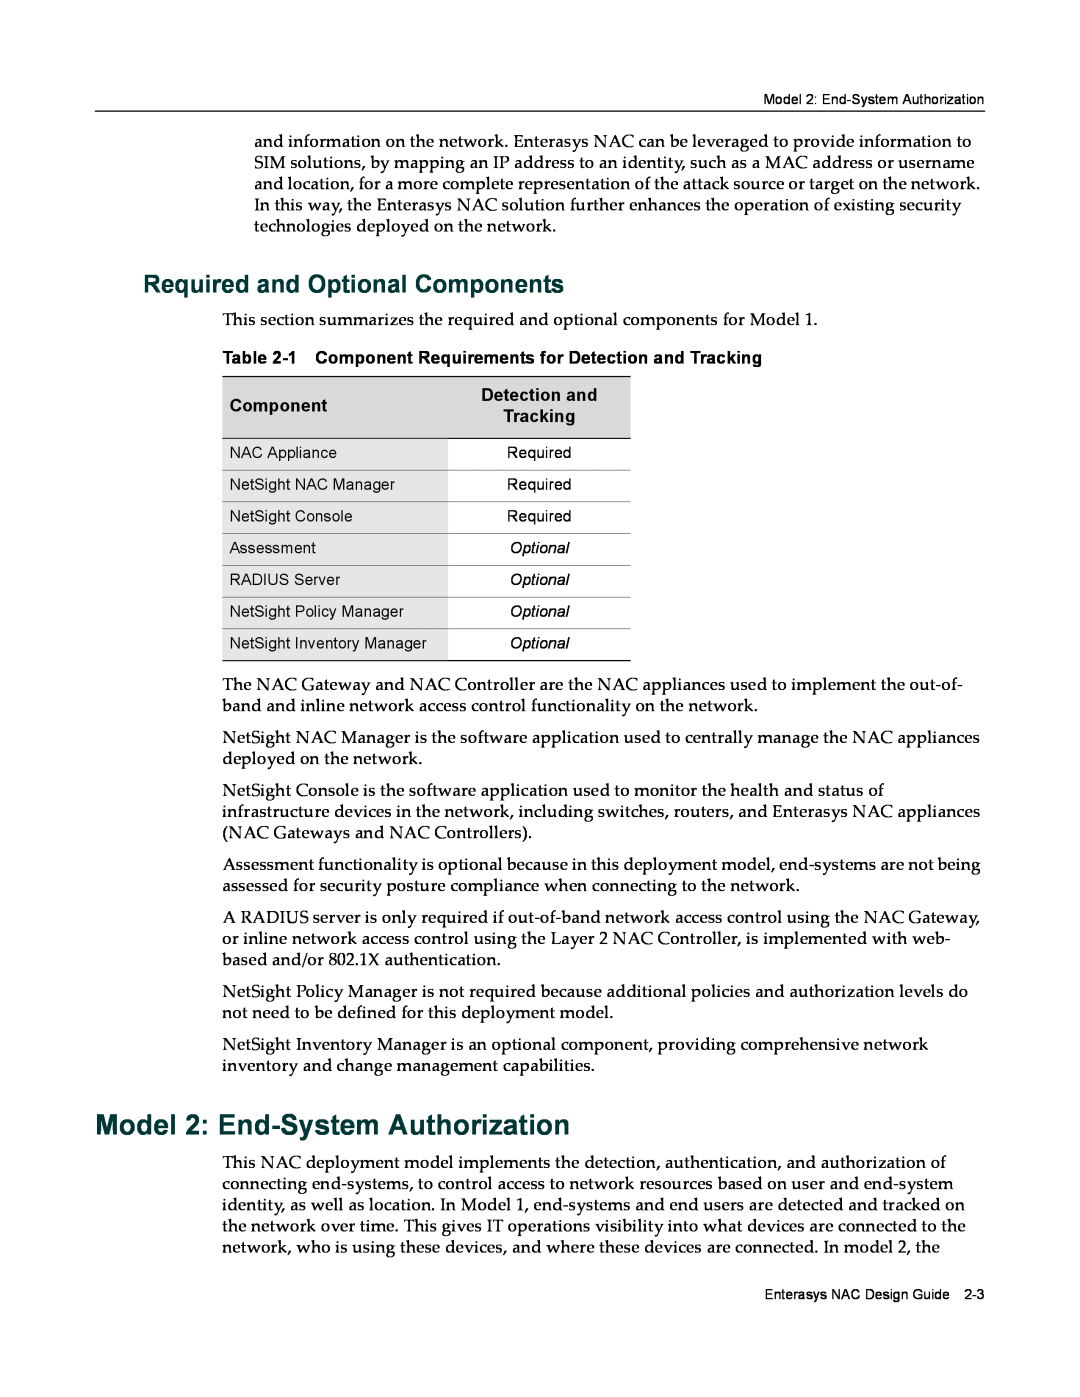 Enterasys Networks 9034385 Model 2 End-System Authorization, Required and Optional Components, Detection and, Tracking 